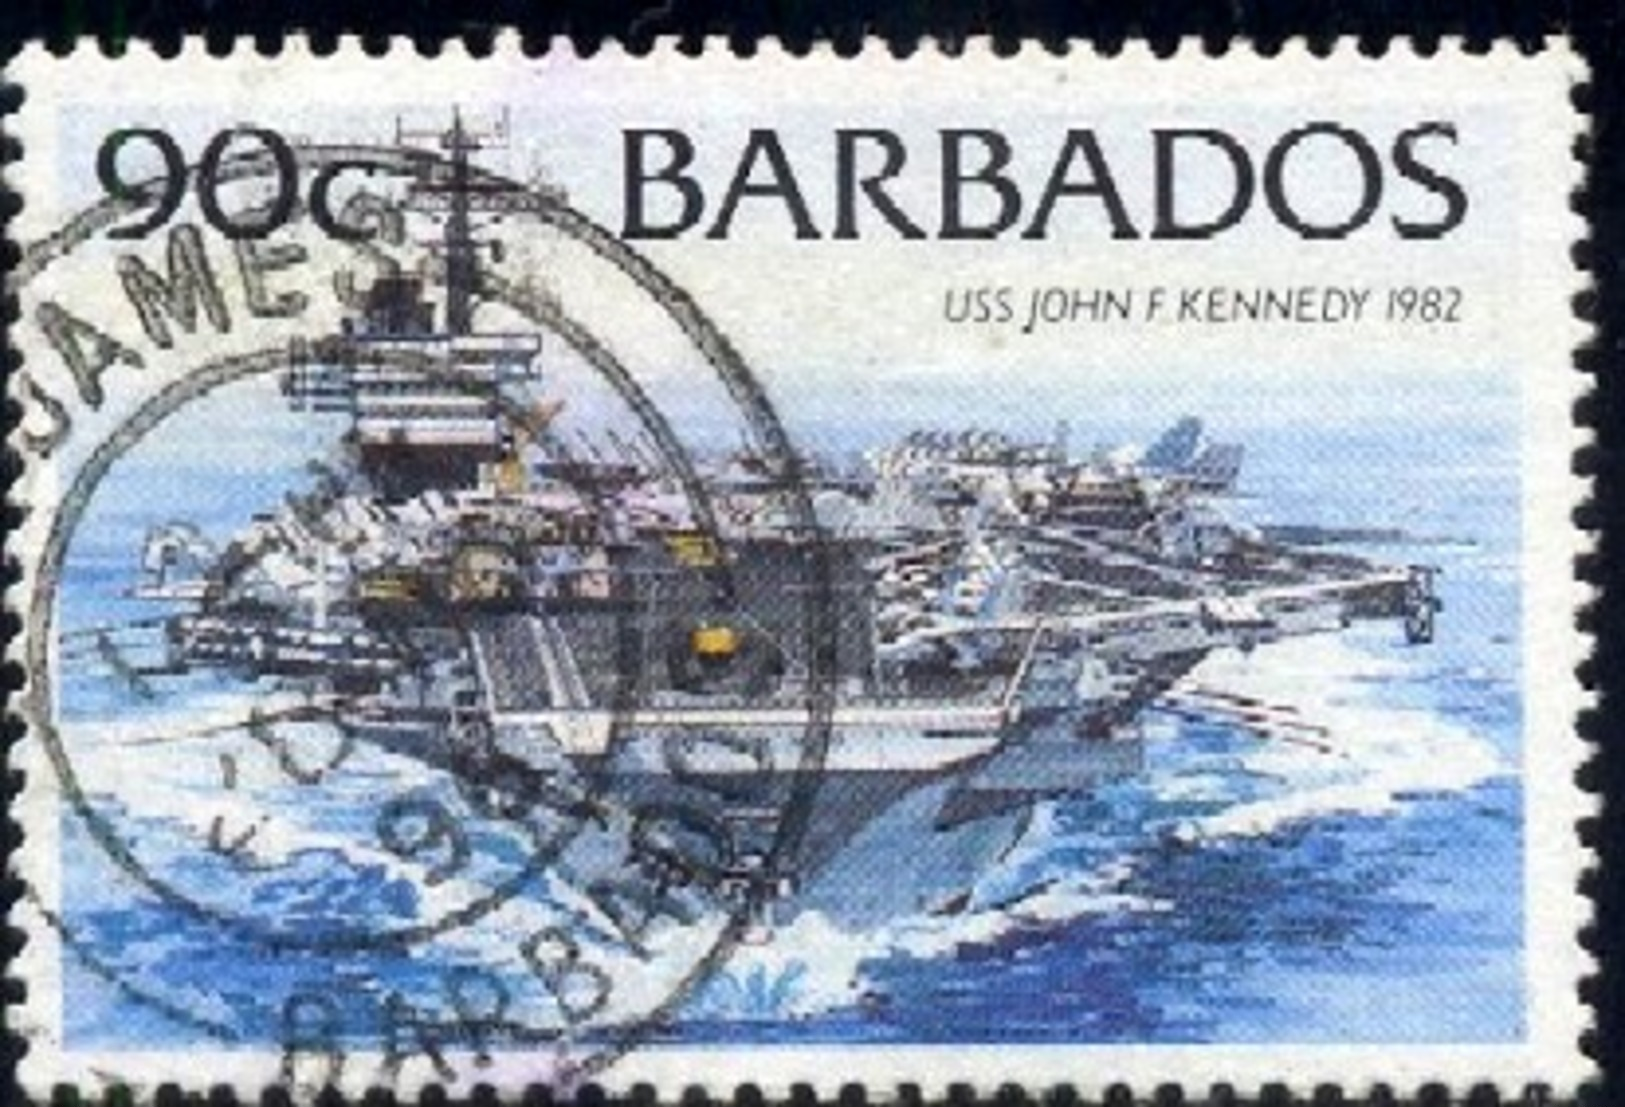 Aircraft Carrier, USS John F. Kennedy, 1982, Barbados Stamp SC#882 Used - Barbados (1966-...)